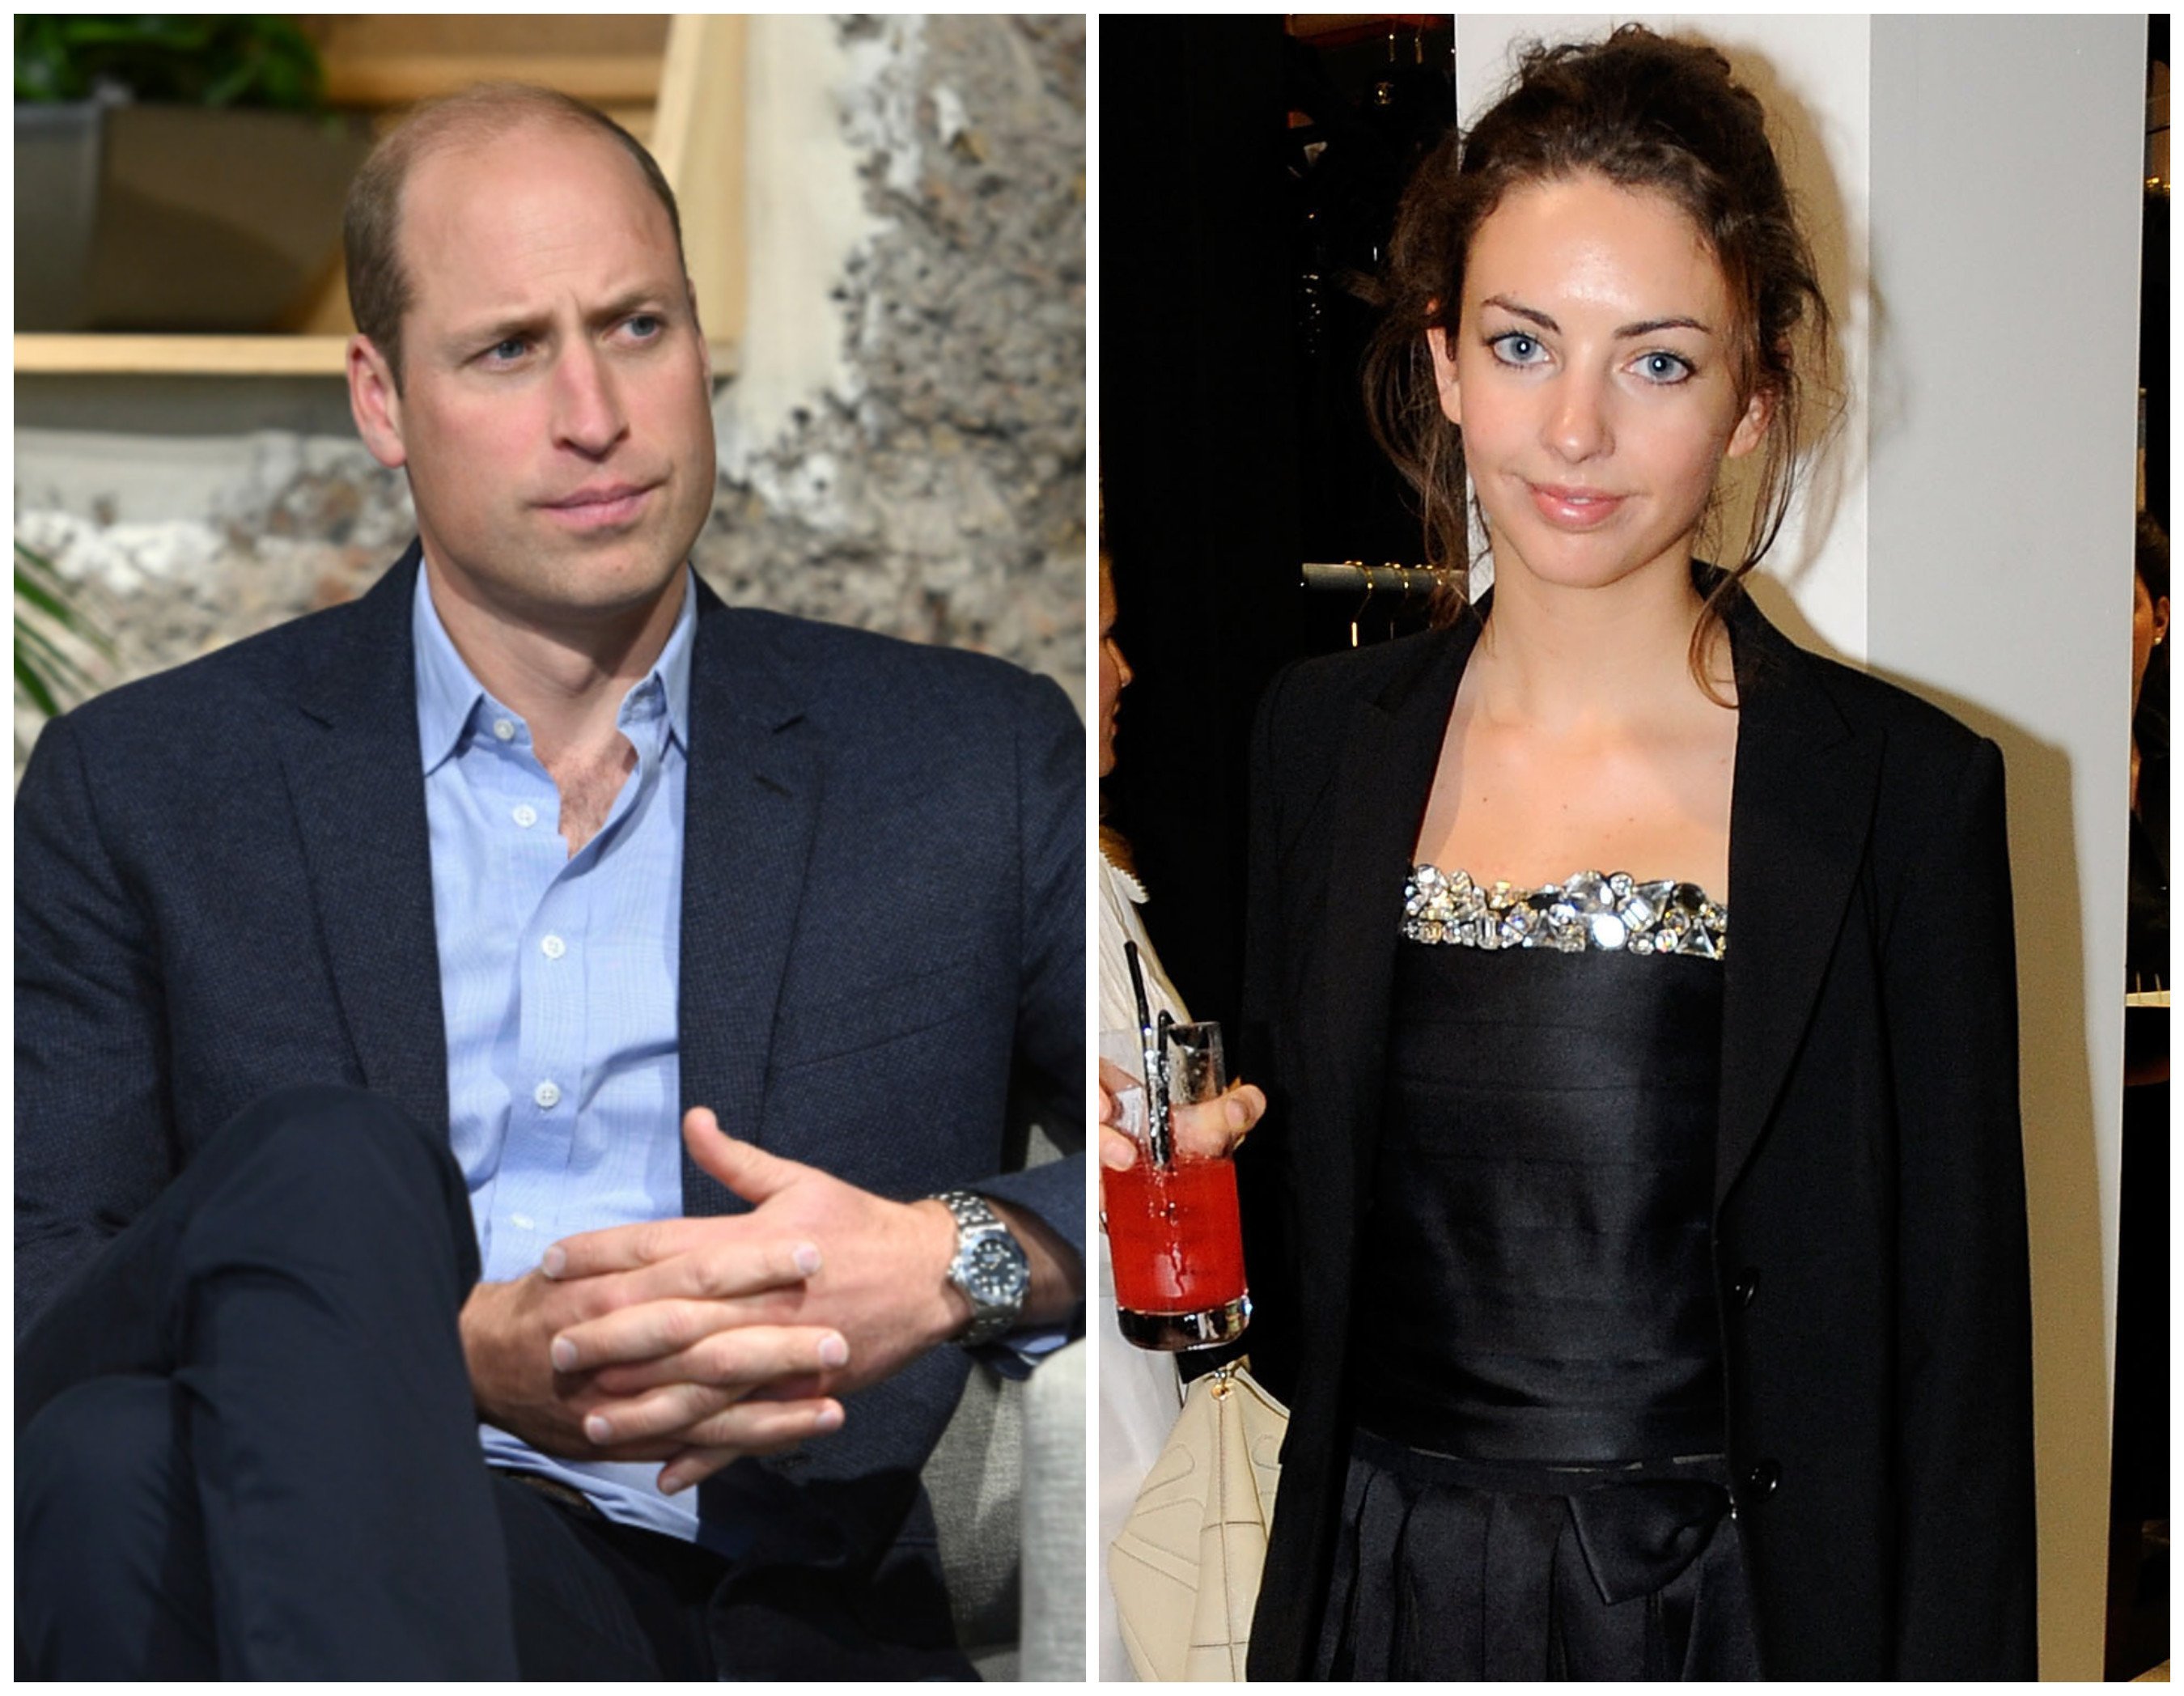 Prince William allegedly had an affair with Rose Hanbury – although there is no concrete evidence to suggest so. Photos: AP, WireImage